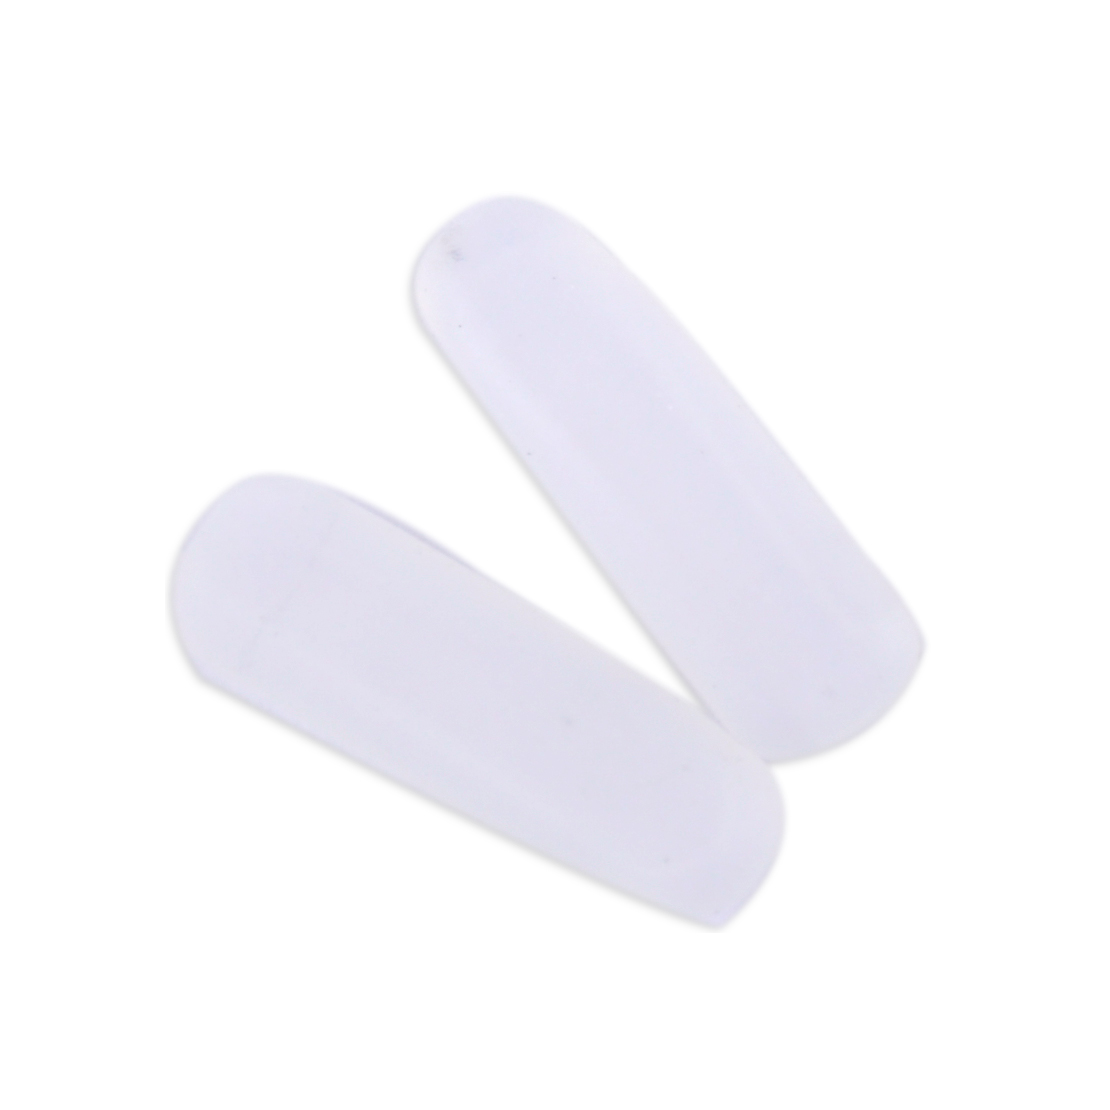 IC BERLIN NOSE PADS REPLACEMENT SOFT SILICONE SLEEVES CLEAR